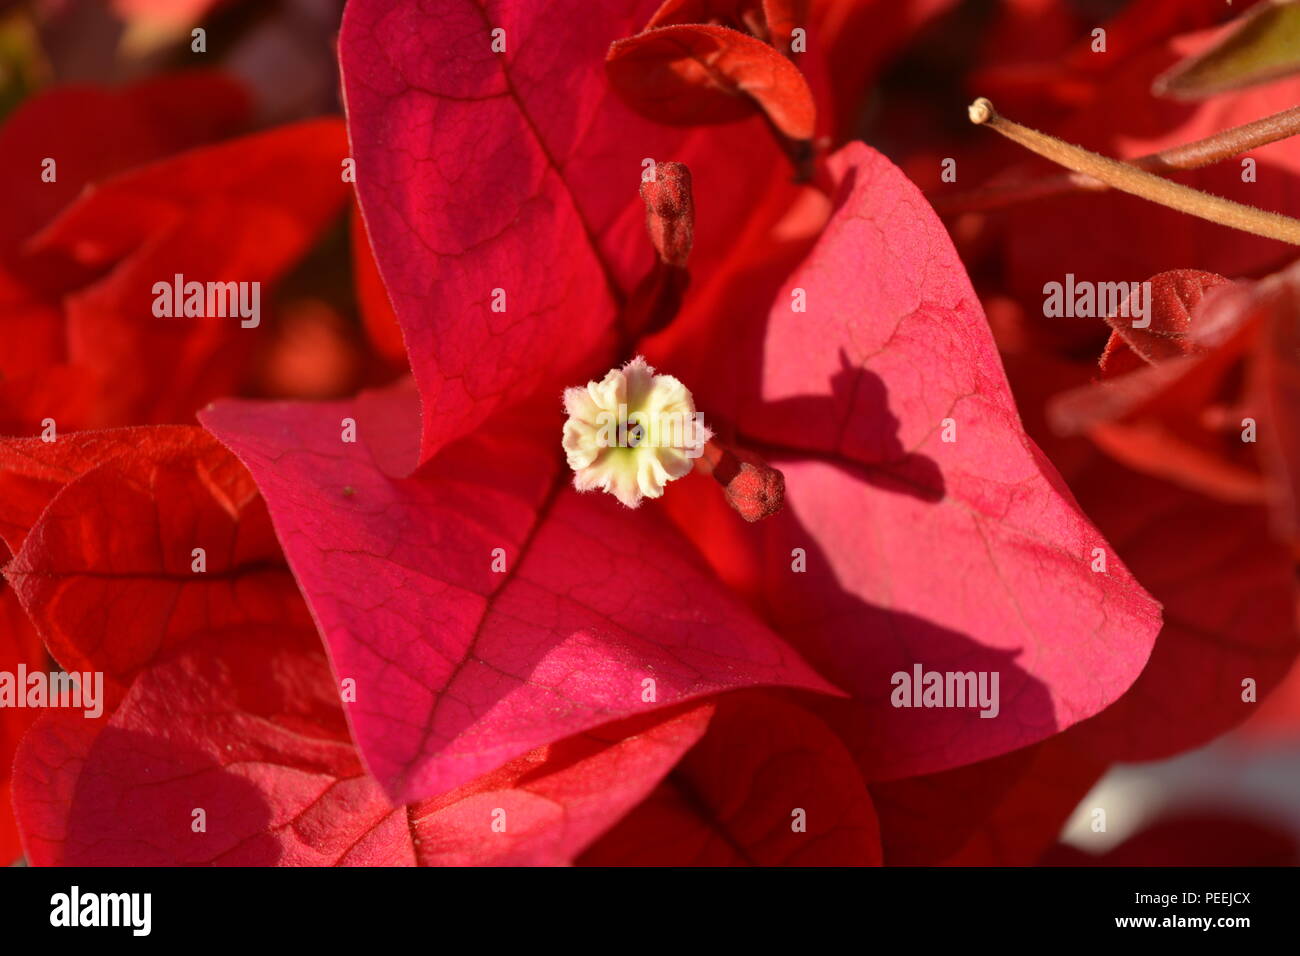 Bougainvillea, close up of red bracts, a flower and two buds. Stock Photo